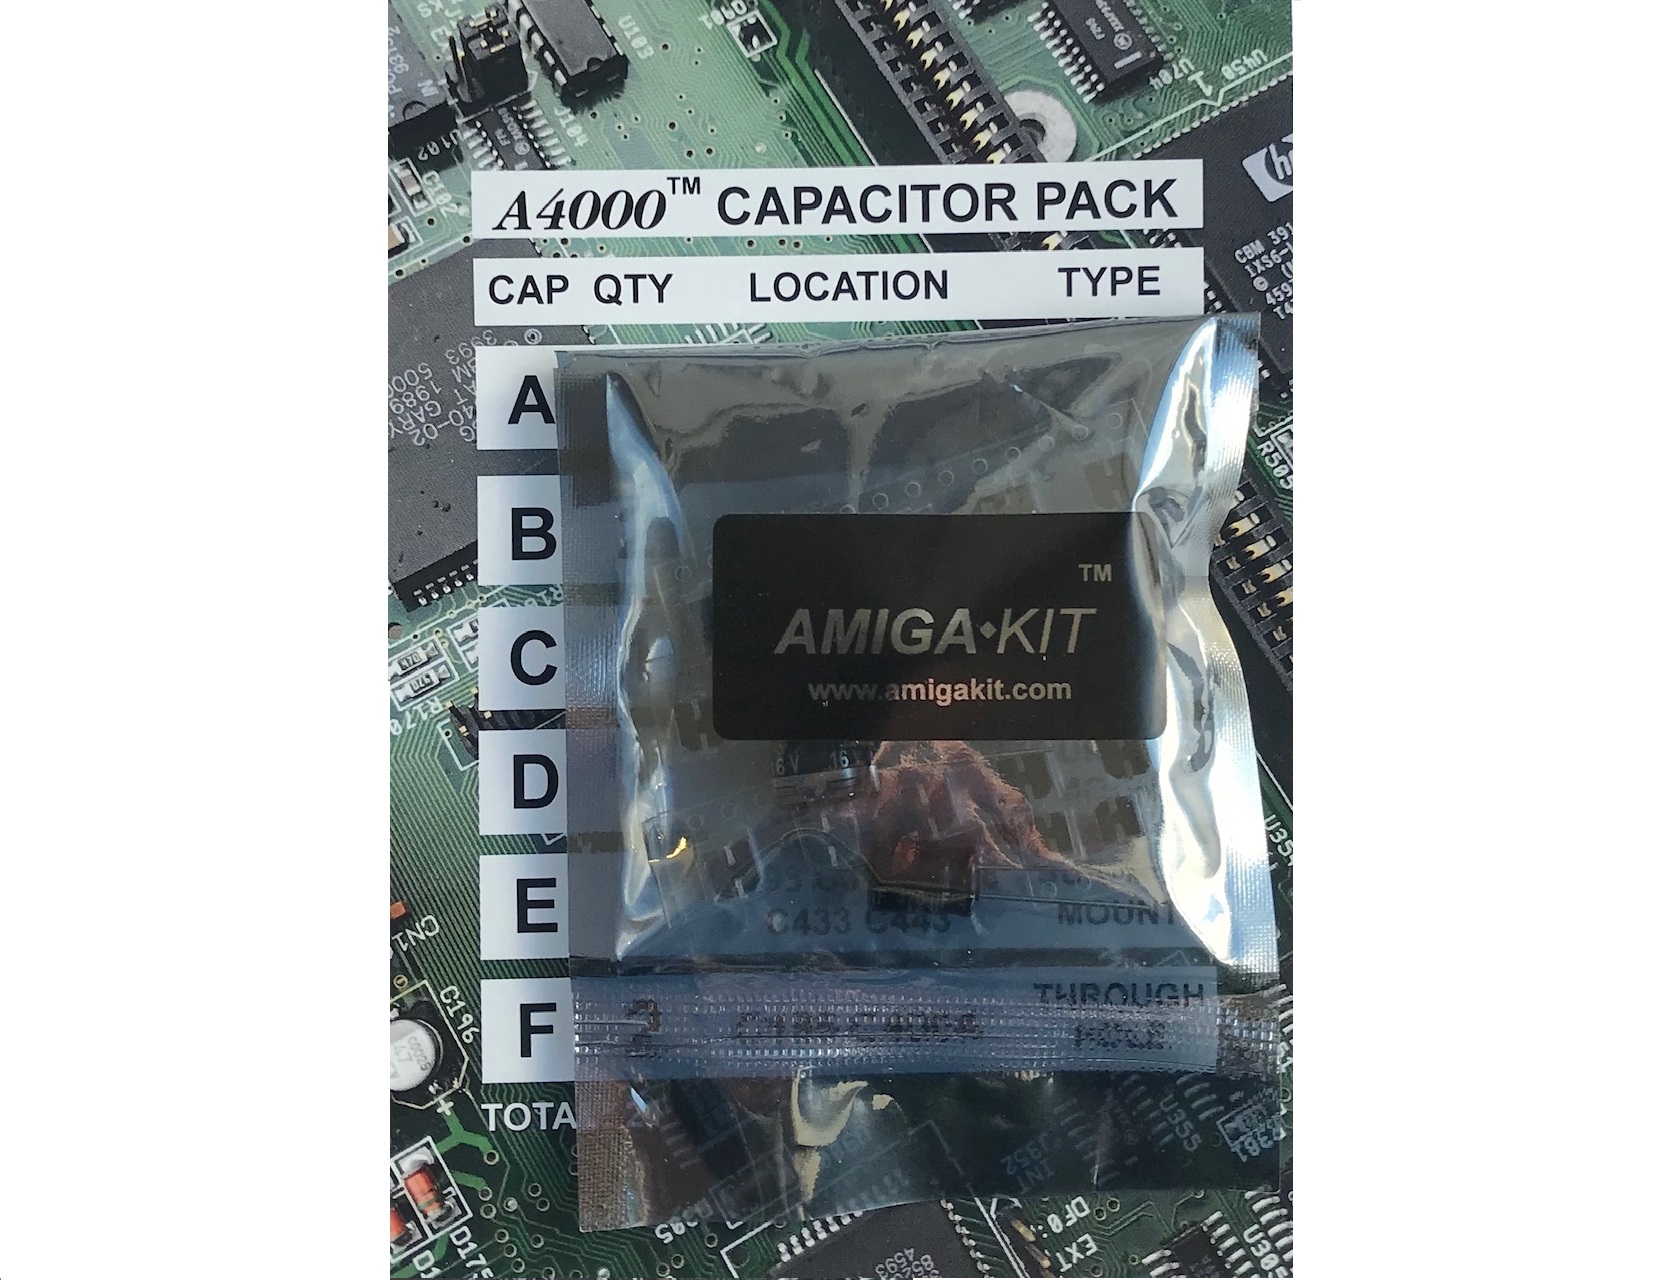 A4000 Capacitor Pack for Professional Recapping